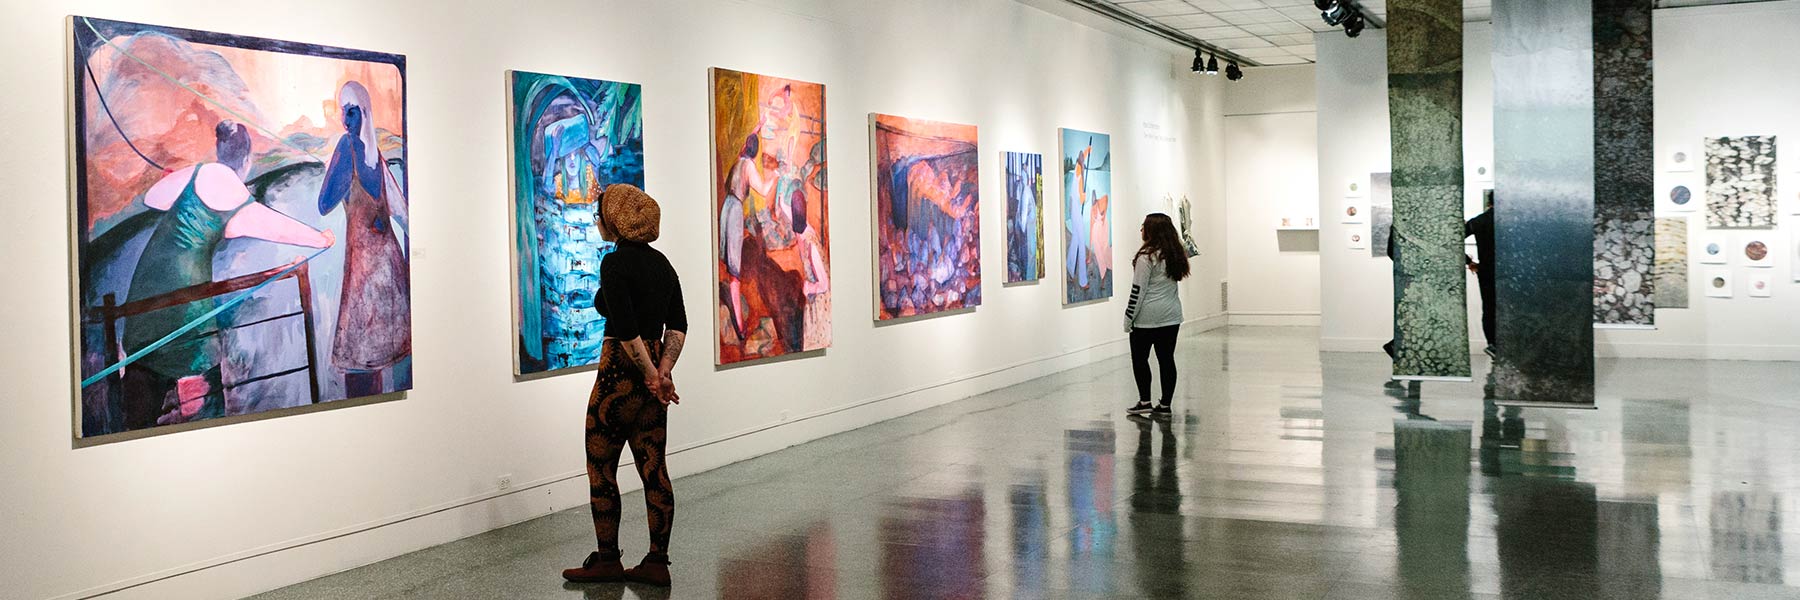 A person looking at paintings in an art gallery.